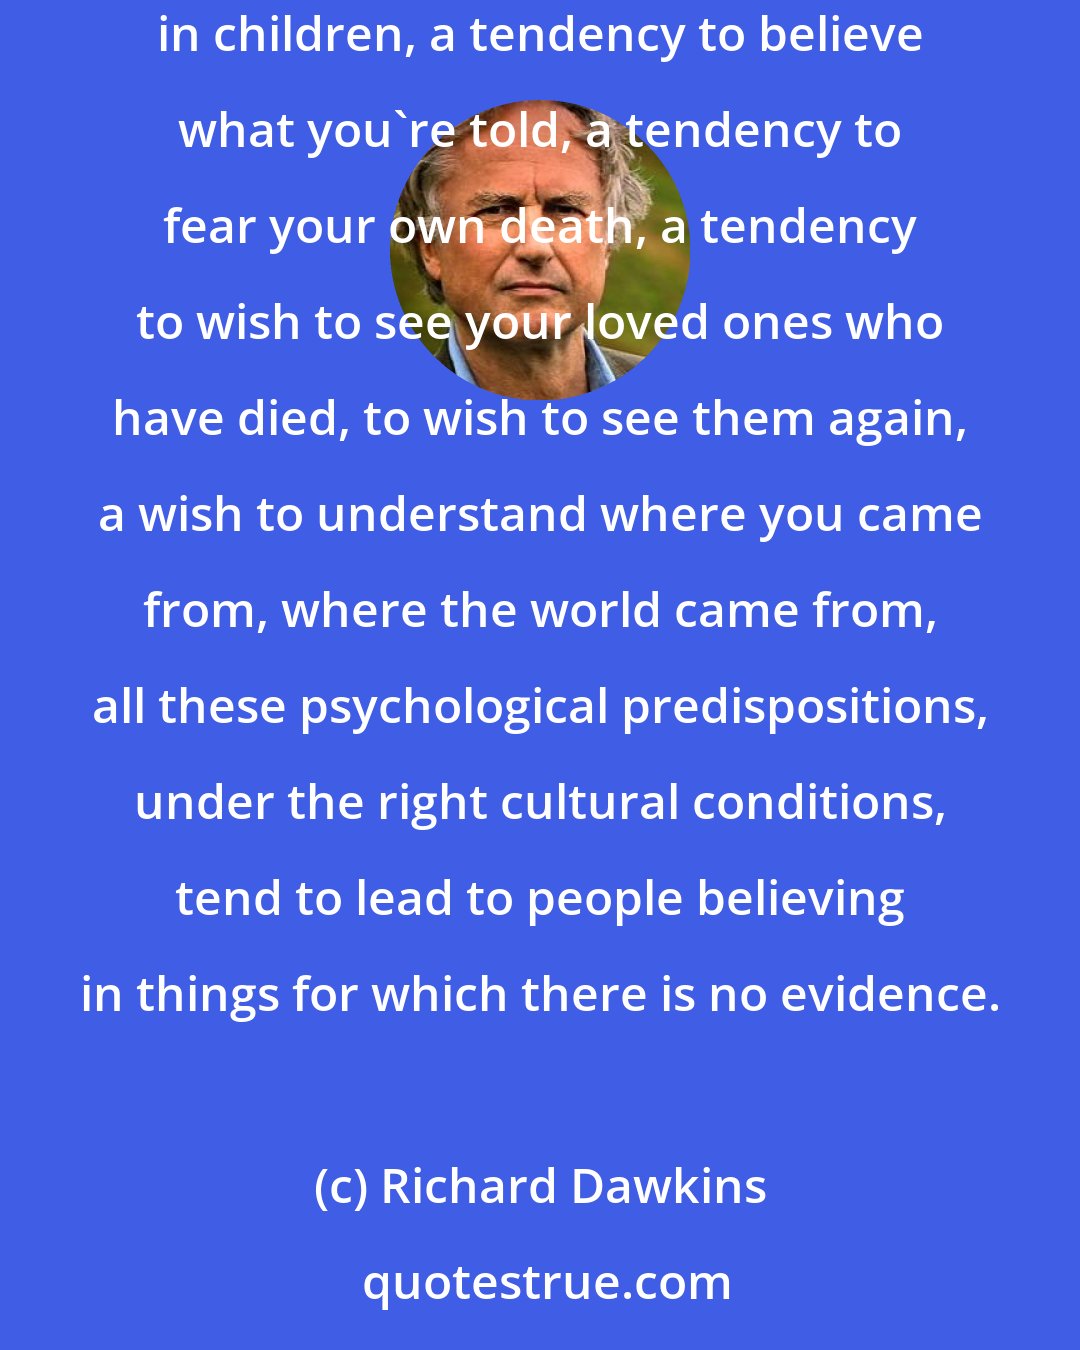 Richard Dawkins: Some sort of belief in all-powerful supernatural beings is common, if not universal. A tendency to obey authority, perhaps especially in children, a tendency to believe what you're told, a tendency to fear your own death, a tendency to wish to see your loved ones who have died, to wish to see them again, a wish to understand where you came from, where the world came from, all these psychological predispositions, under the right cultural conditions, tend to lead to people believing in things for which there is no evidence.